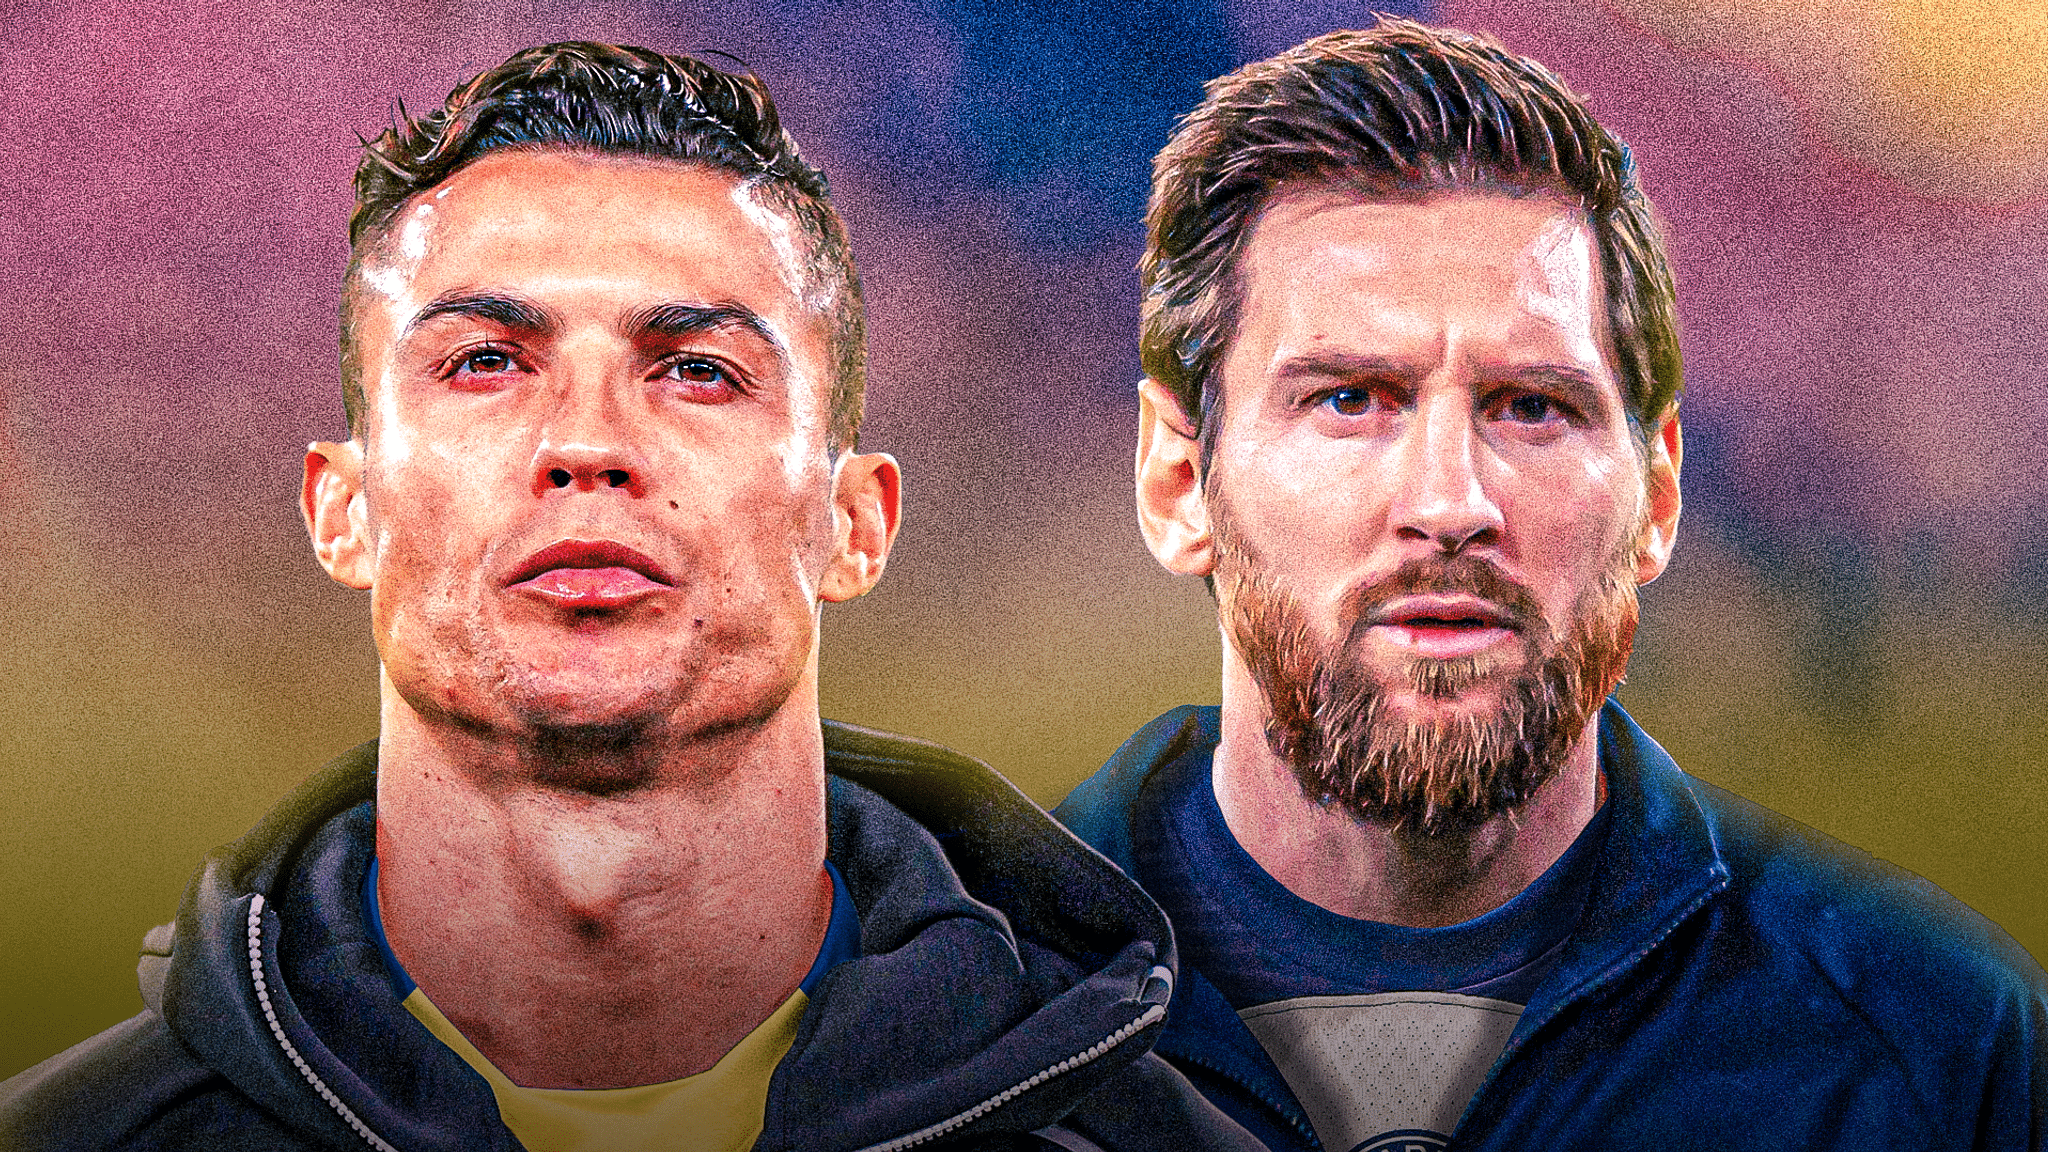 Romano opens up on why Messi refused to reunite with Ronaldo